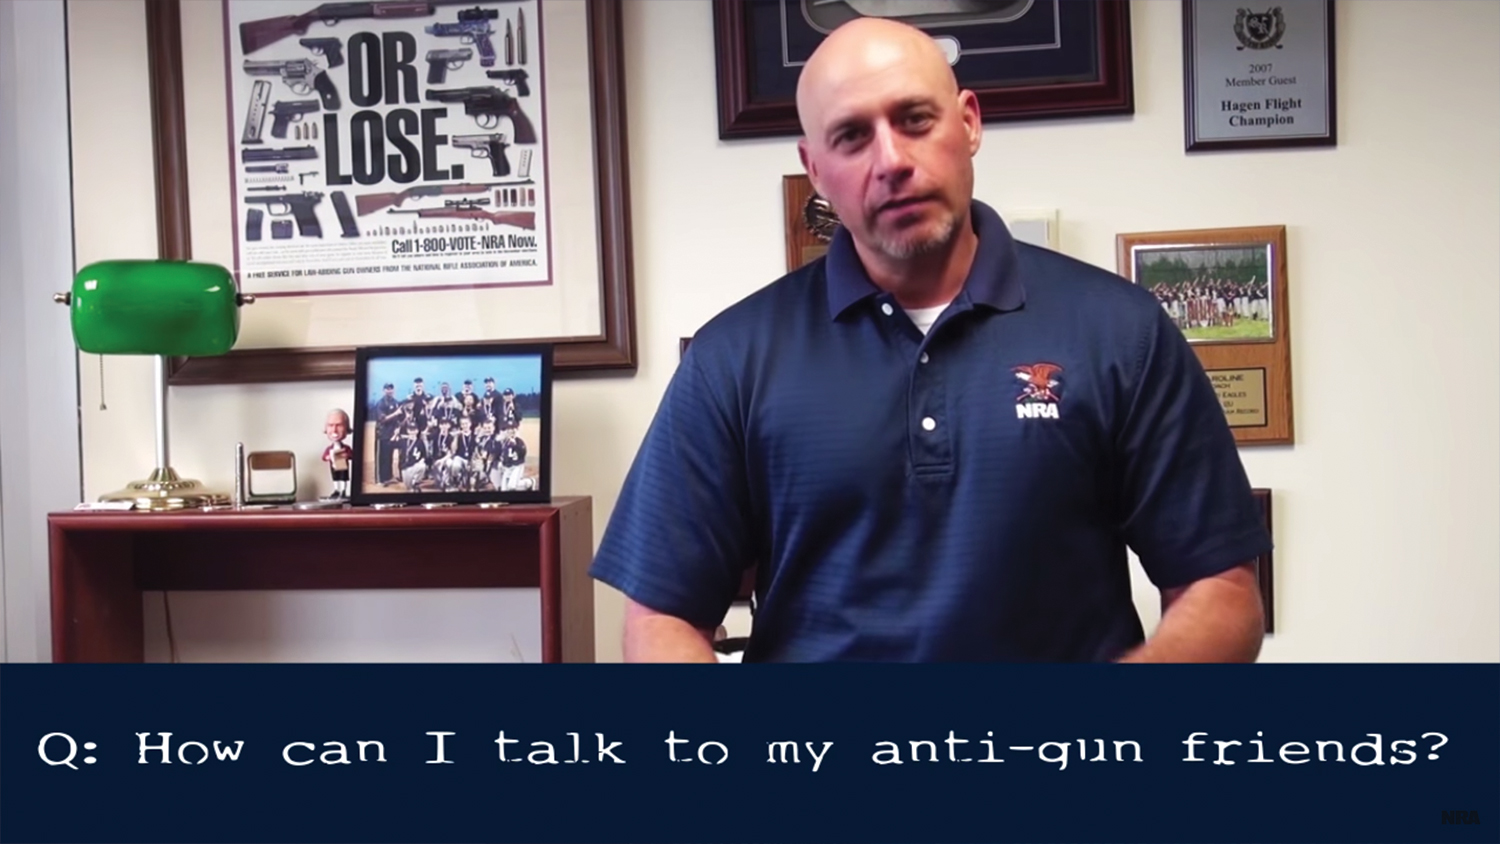 Ask Me Anything: How can I talk to my anti-gun friends?